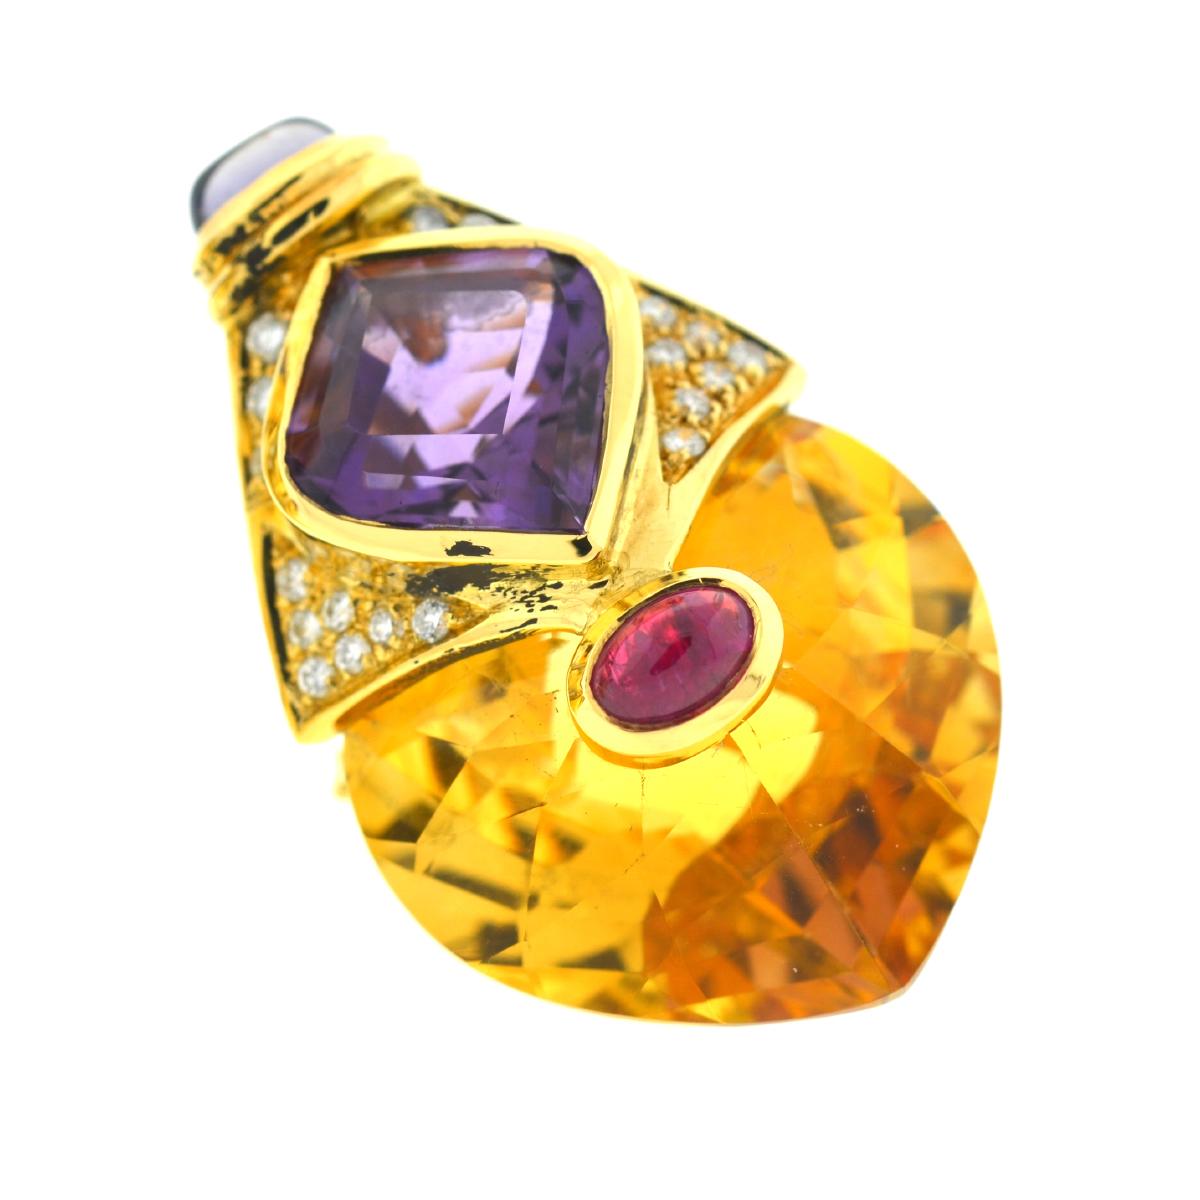 Style 18k Yellow Gold Diamond Citrine Amethyst & Sapphire Cabochon Clip Earrings
Metal 18k Yellow Gold
Stones Diamonds, Citrine, Amethyst and Sapphire cabochon
Weight 31.8 grams
Measurements 1